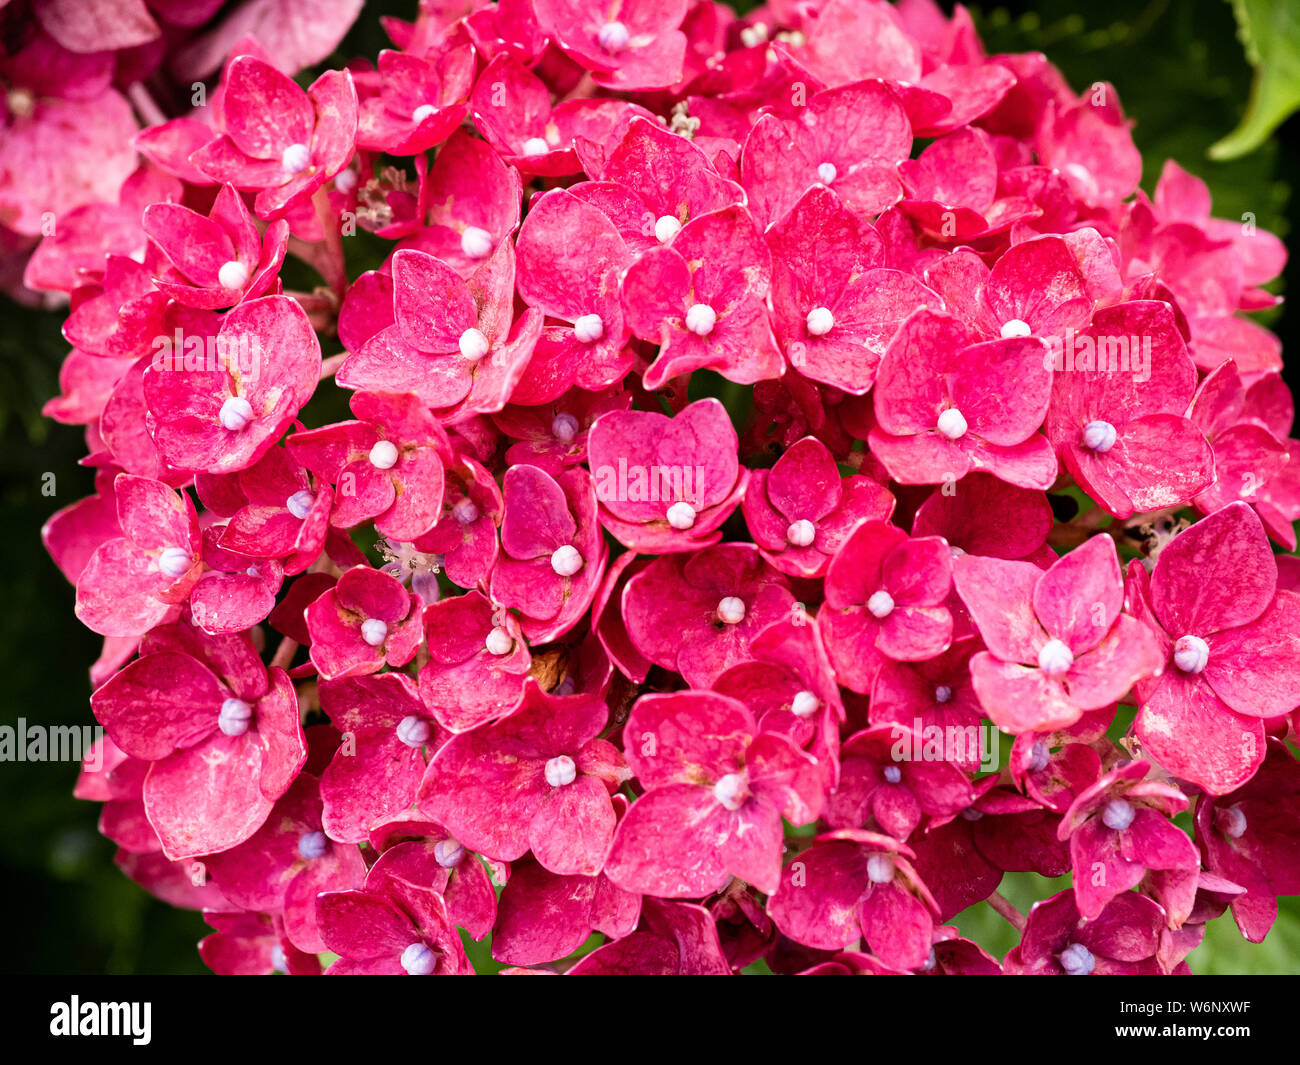 A cluster of red hydrangeas bloom beside a hiking path in central Japan. This bright clustered flowers are popular across Japan in the summer. Stock Photo